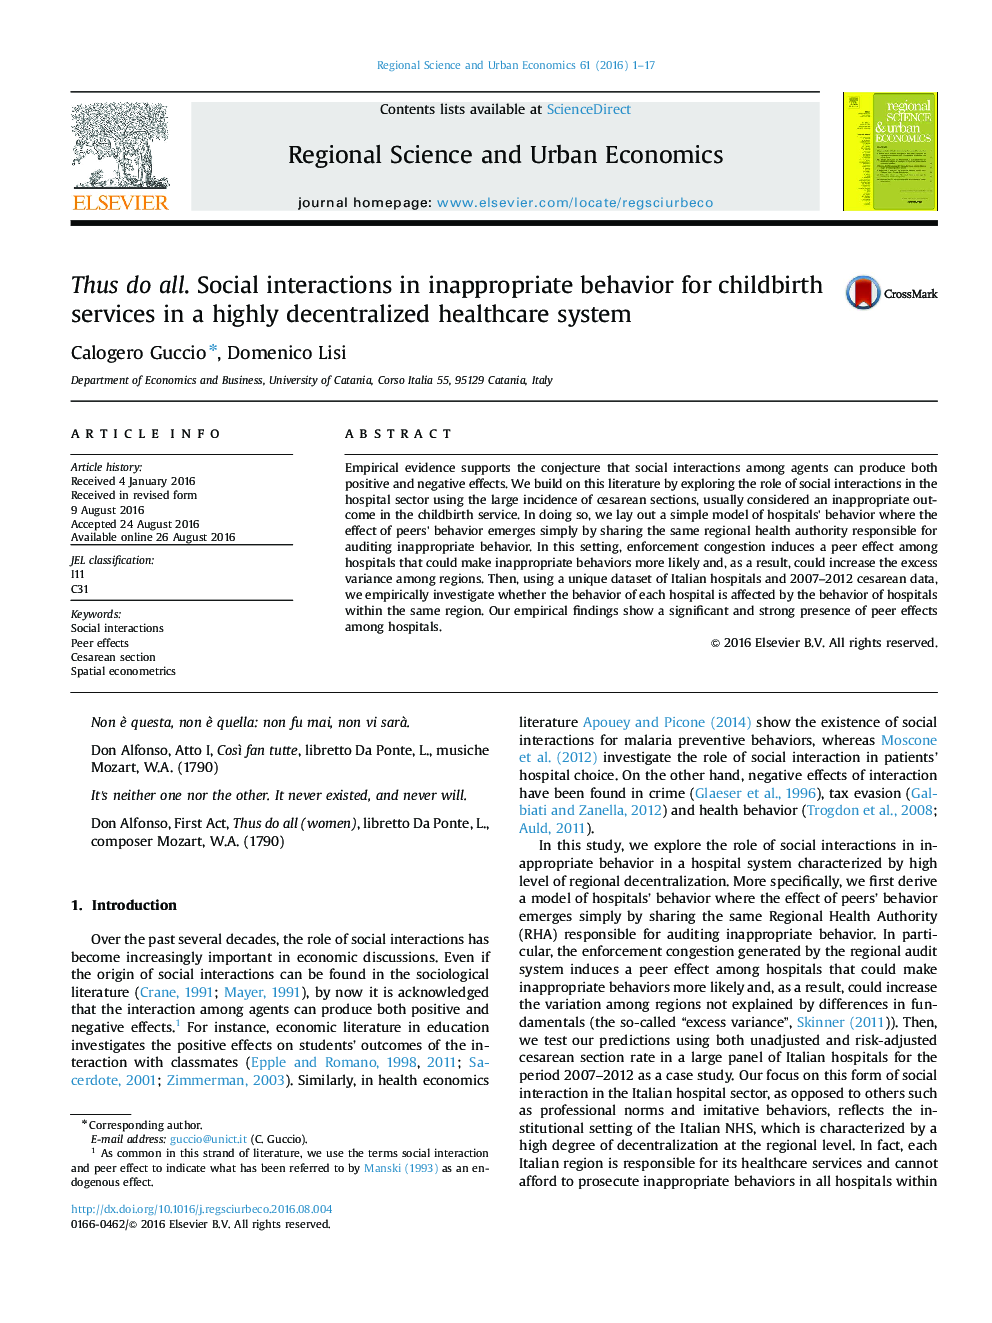 Thus do all. Social interactions in inappropriate behavior for childbirth services in a highly decentralized healthcare system